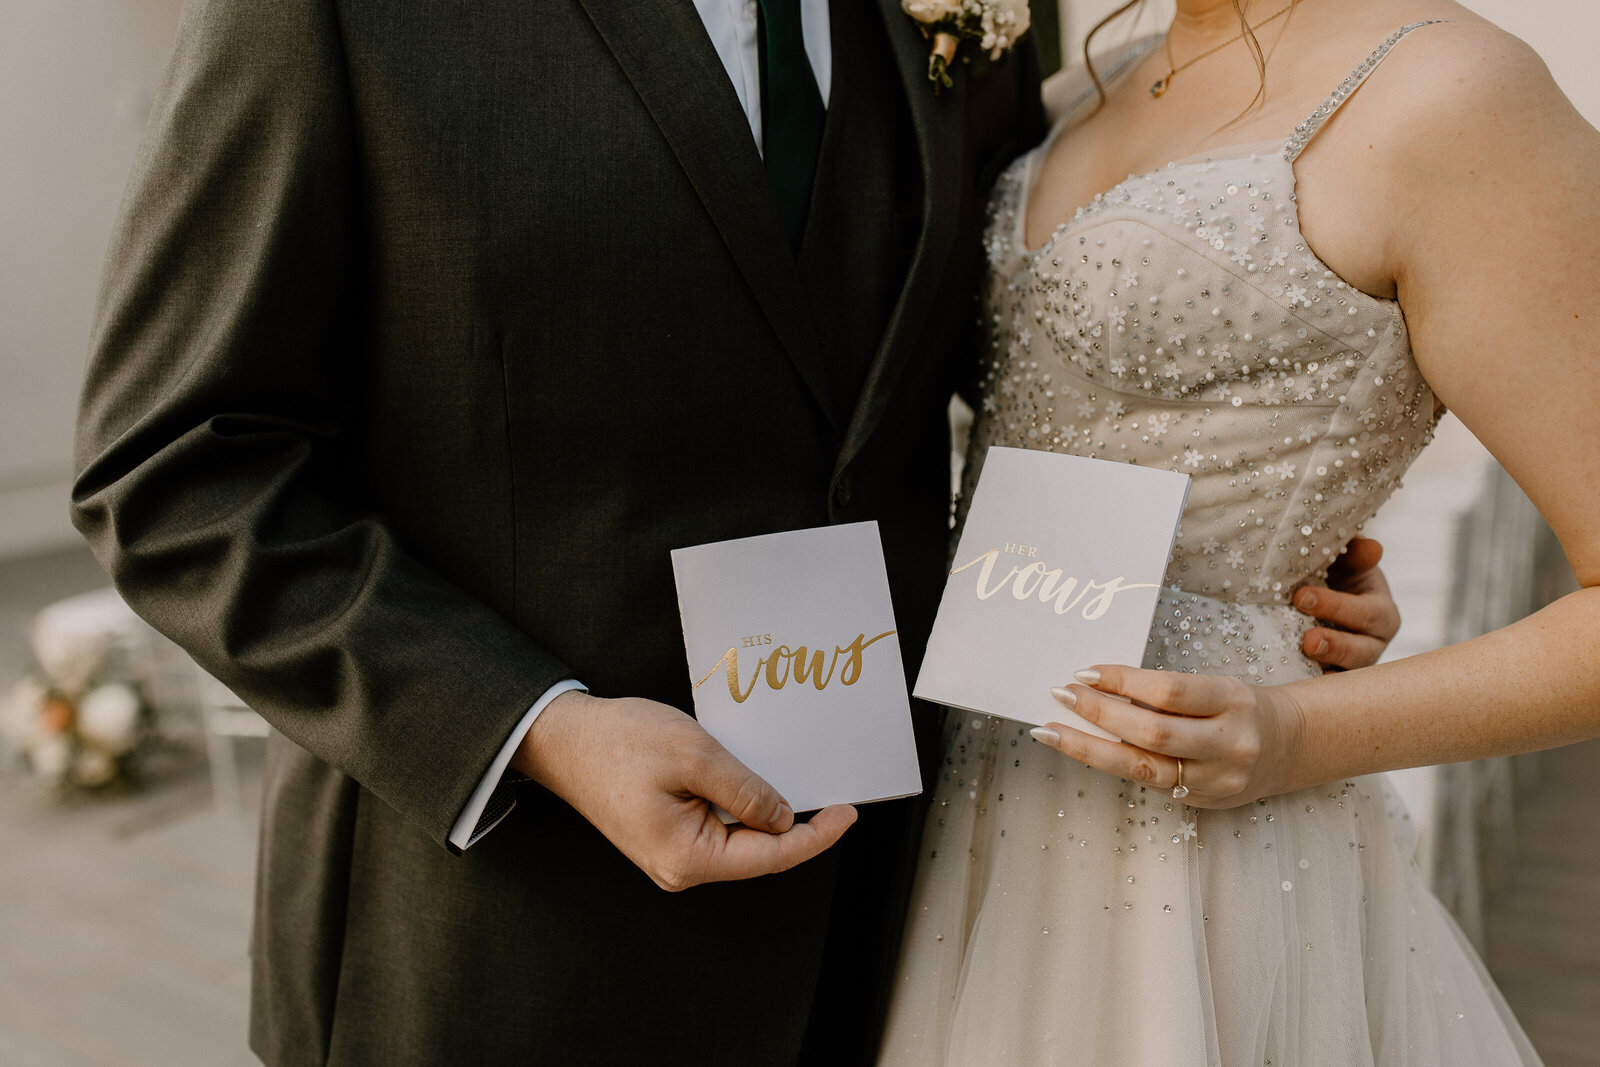 A bride and groom holding up wedding invitations.